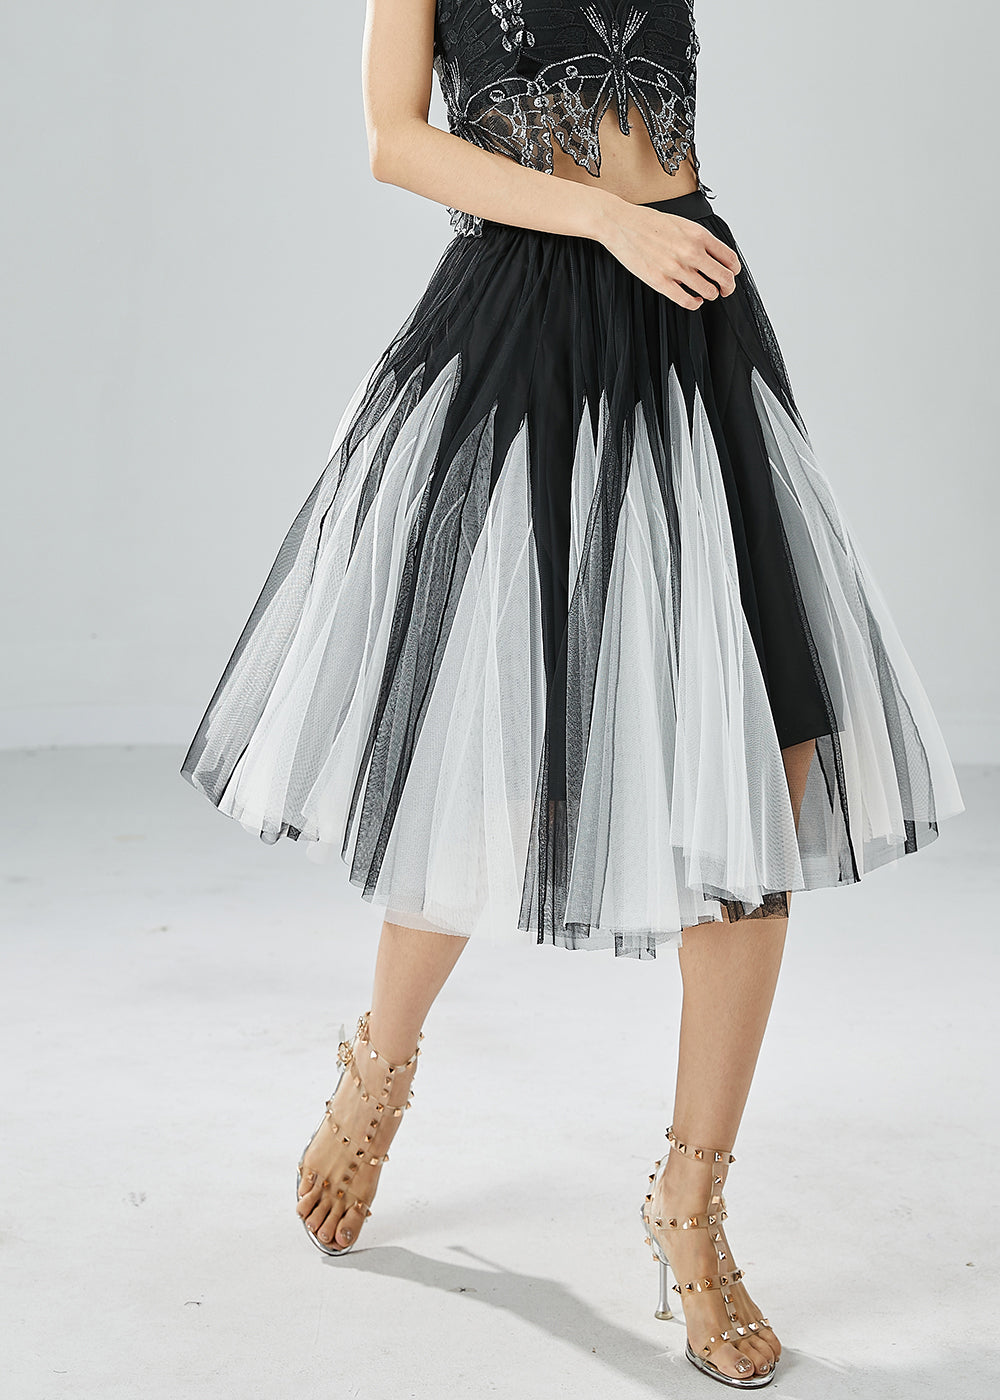 French Black White Patchwork Exra Large Hem Tulle Pleated Skirts Summer